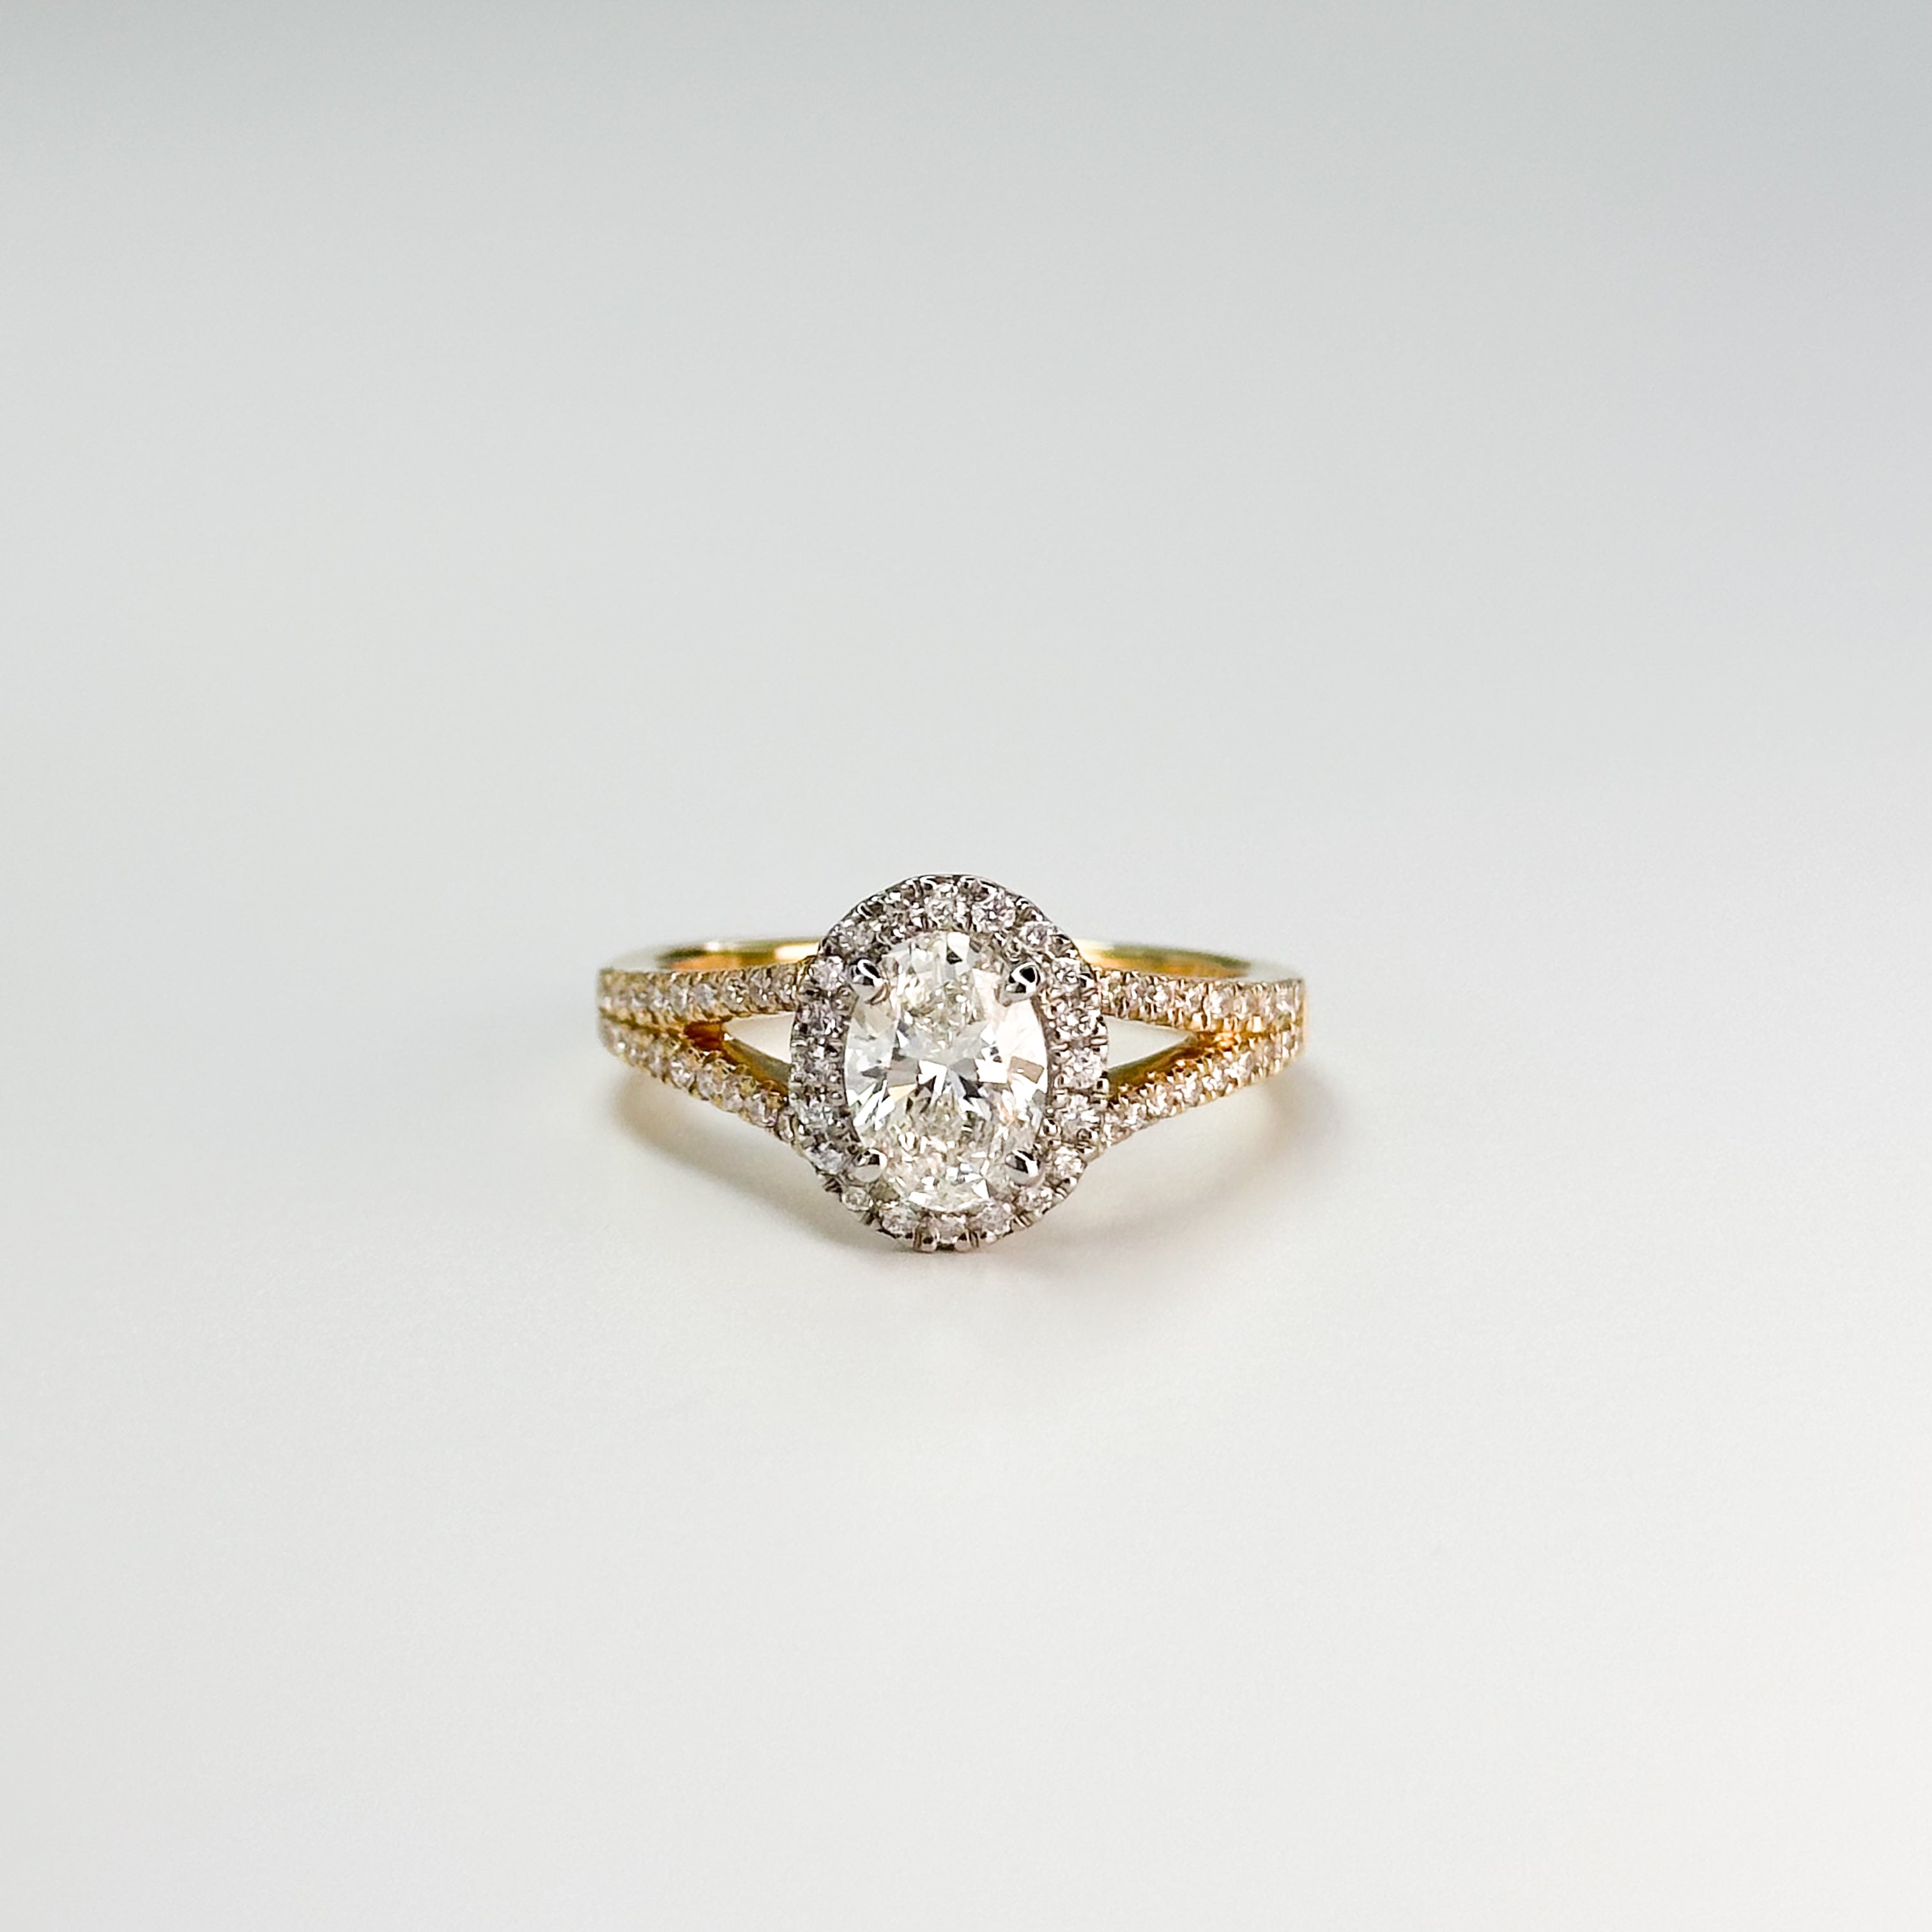 0.80ct GIA Oval Diamond Ring with Halo